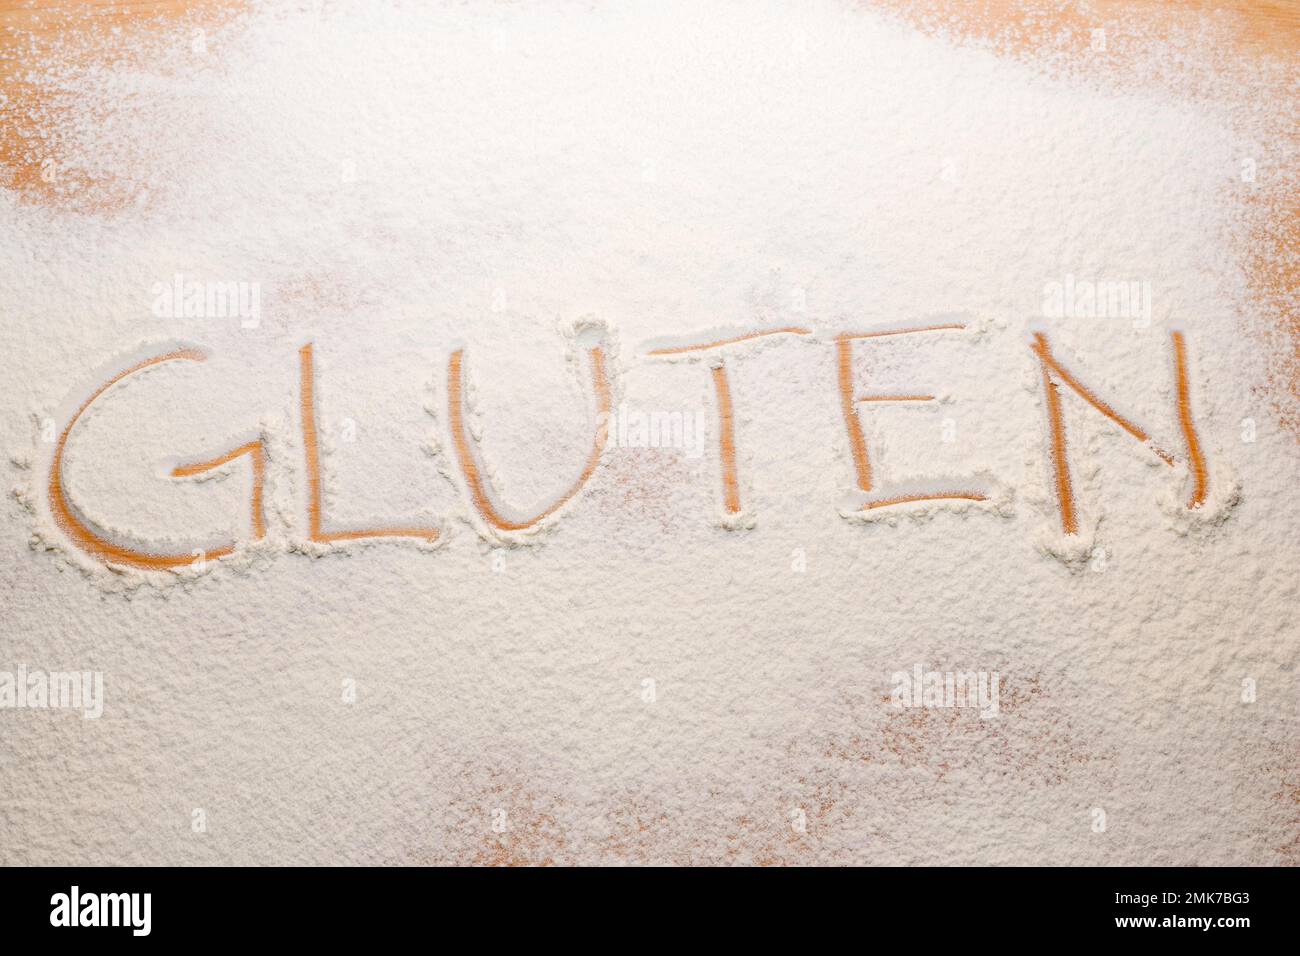 The word gluten was written in the flour on a pasta board Stock Photo